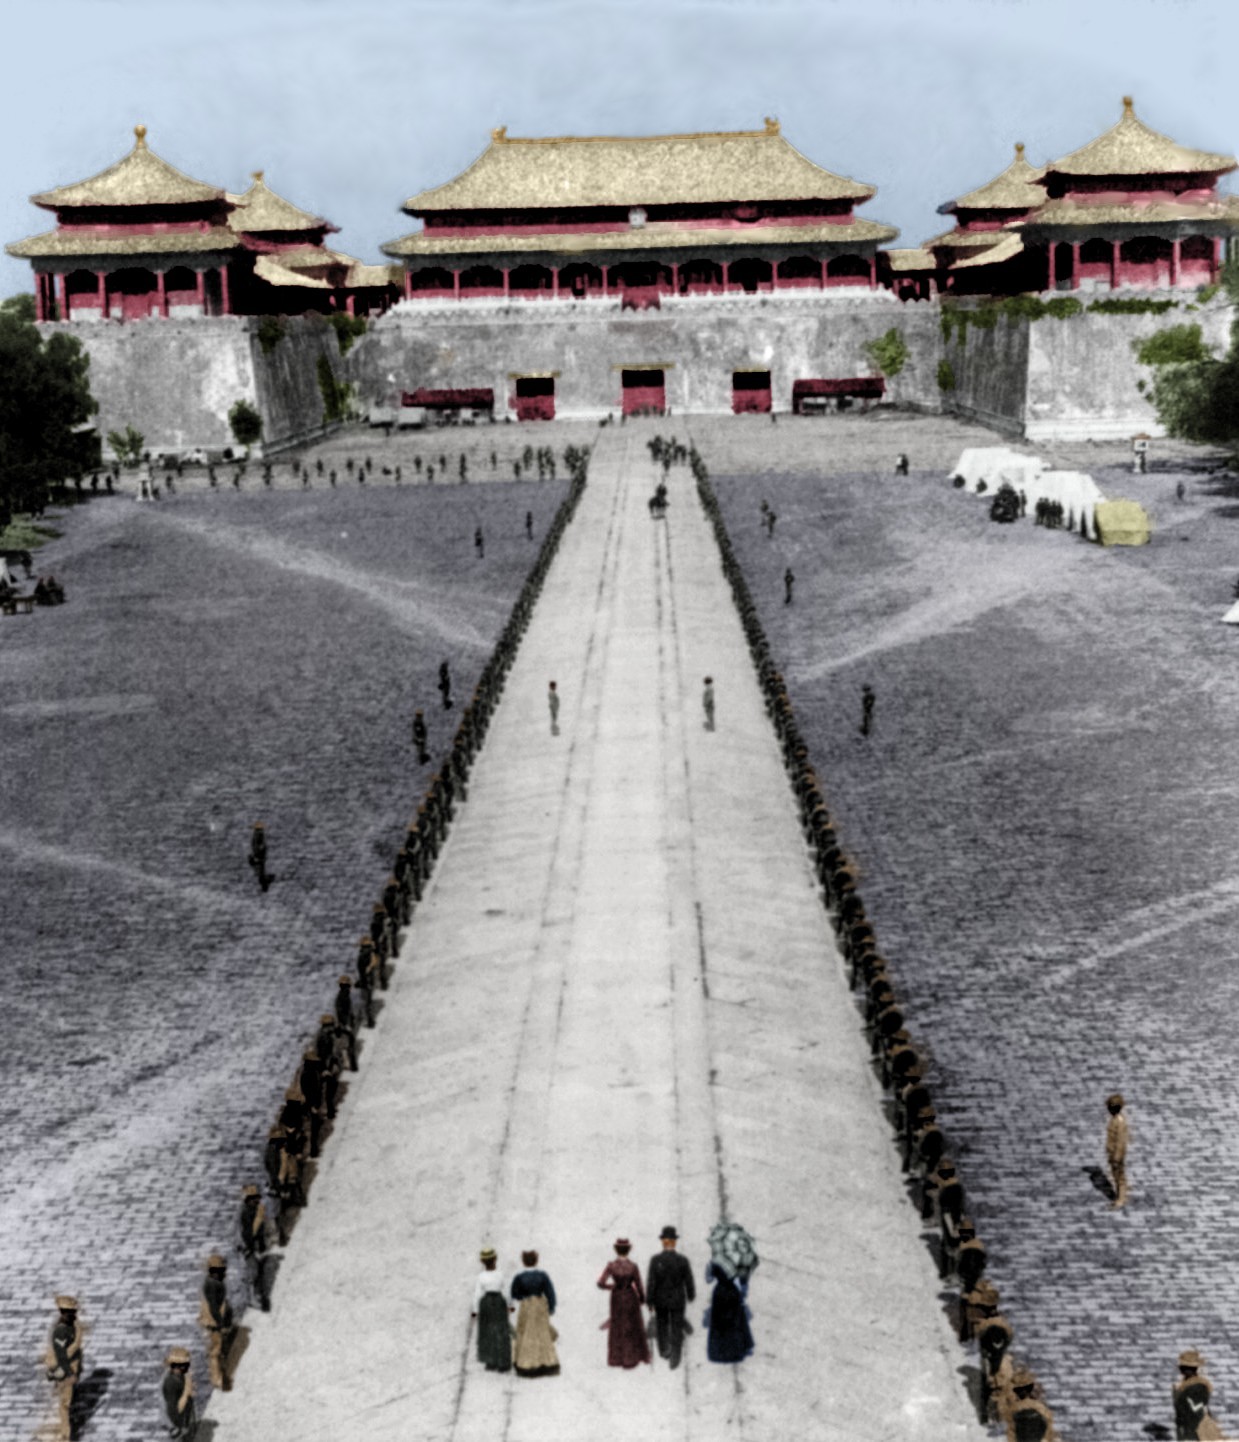 US Army at the Meridian Gate of the Forbidden City, Peking, China 1901.